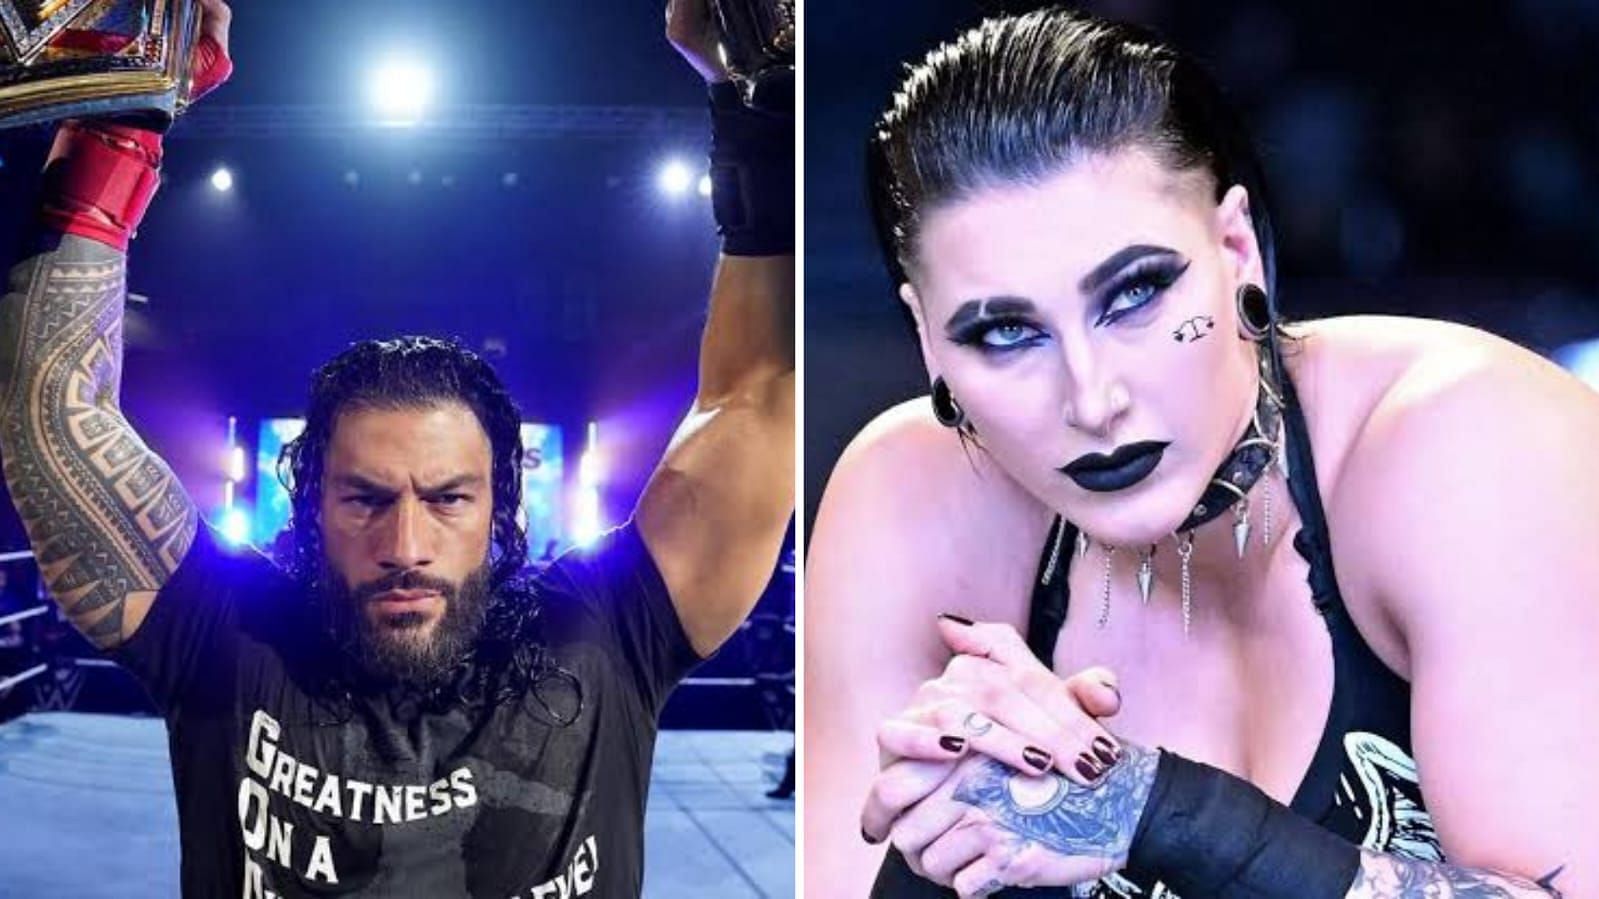 Reigns and Ripley are two of WWE